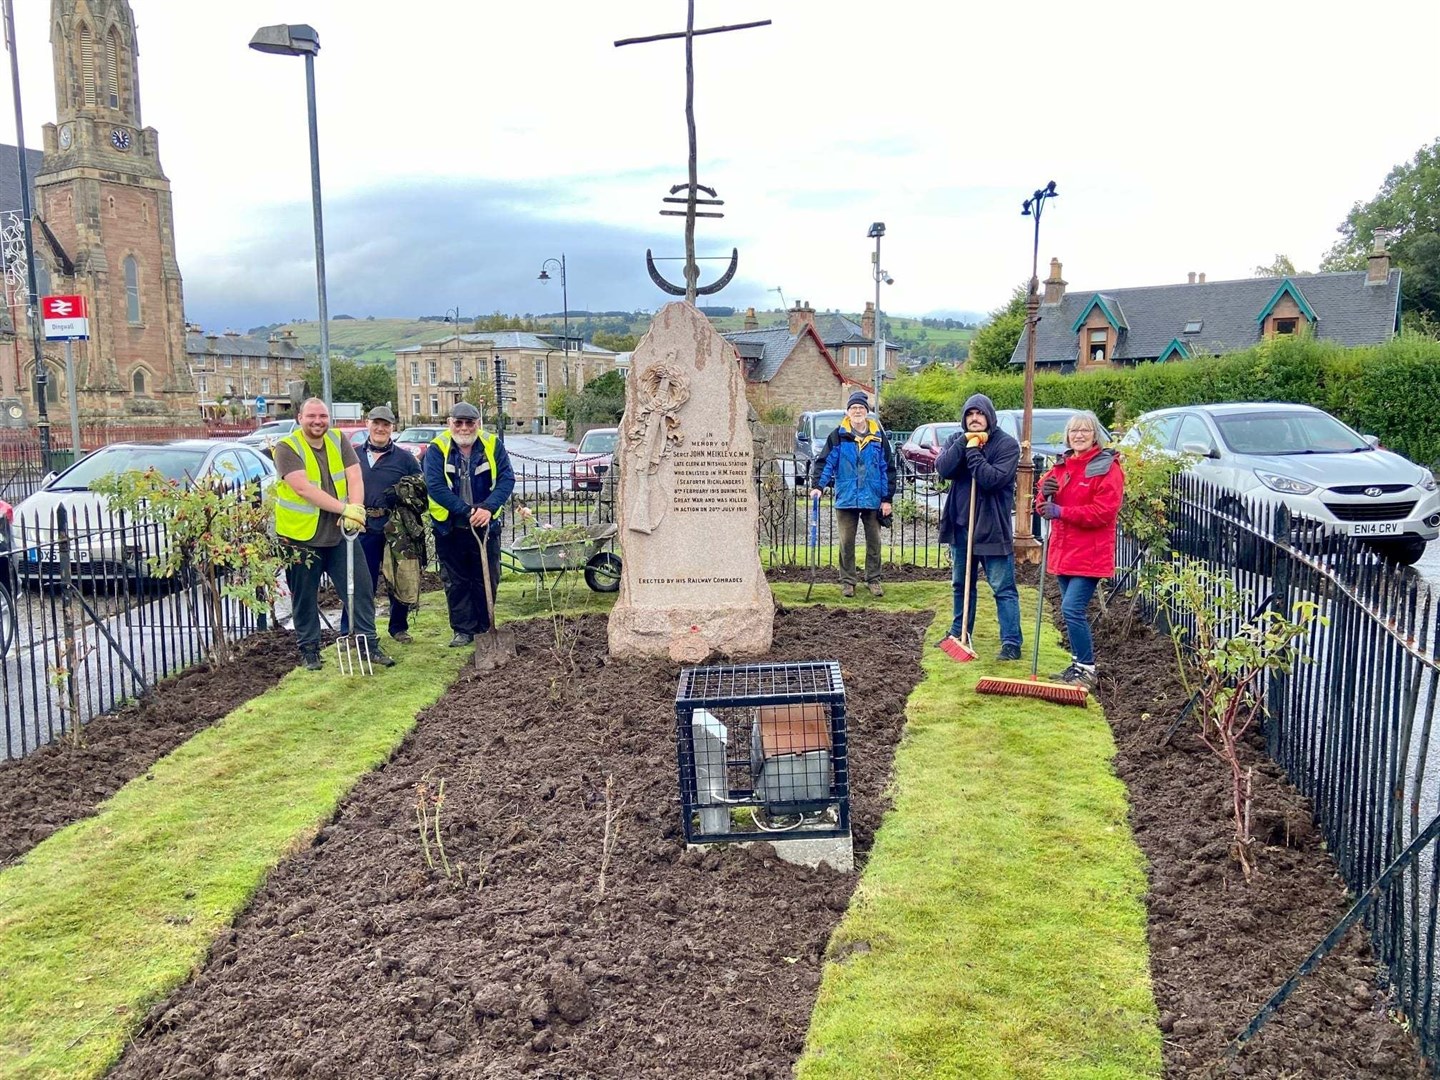 Volunteers at the Normandy and Seaforth Memorial flower bed have been thanked for a great job. Picture: Dingwall Community Council